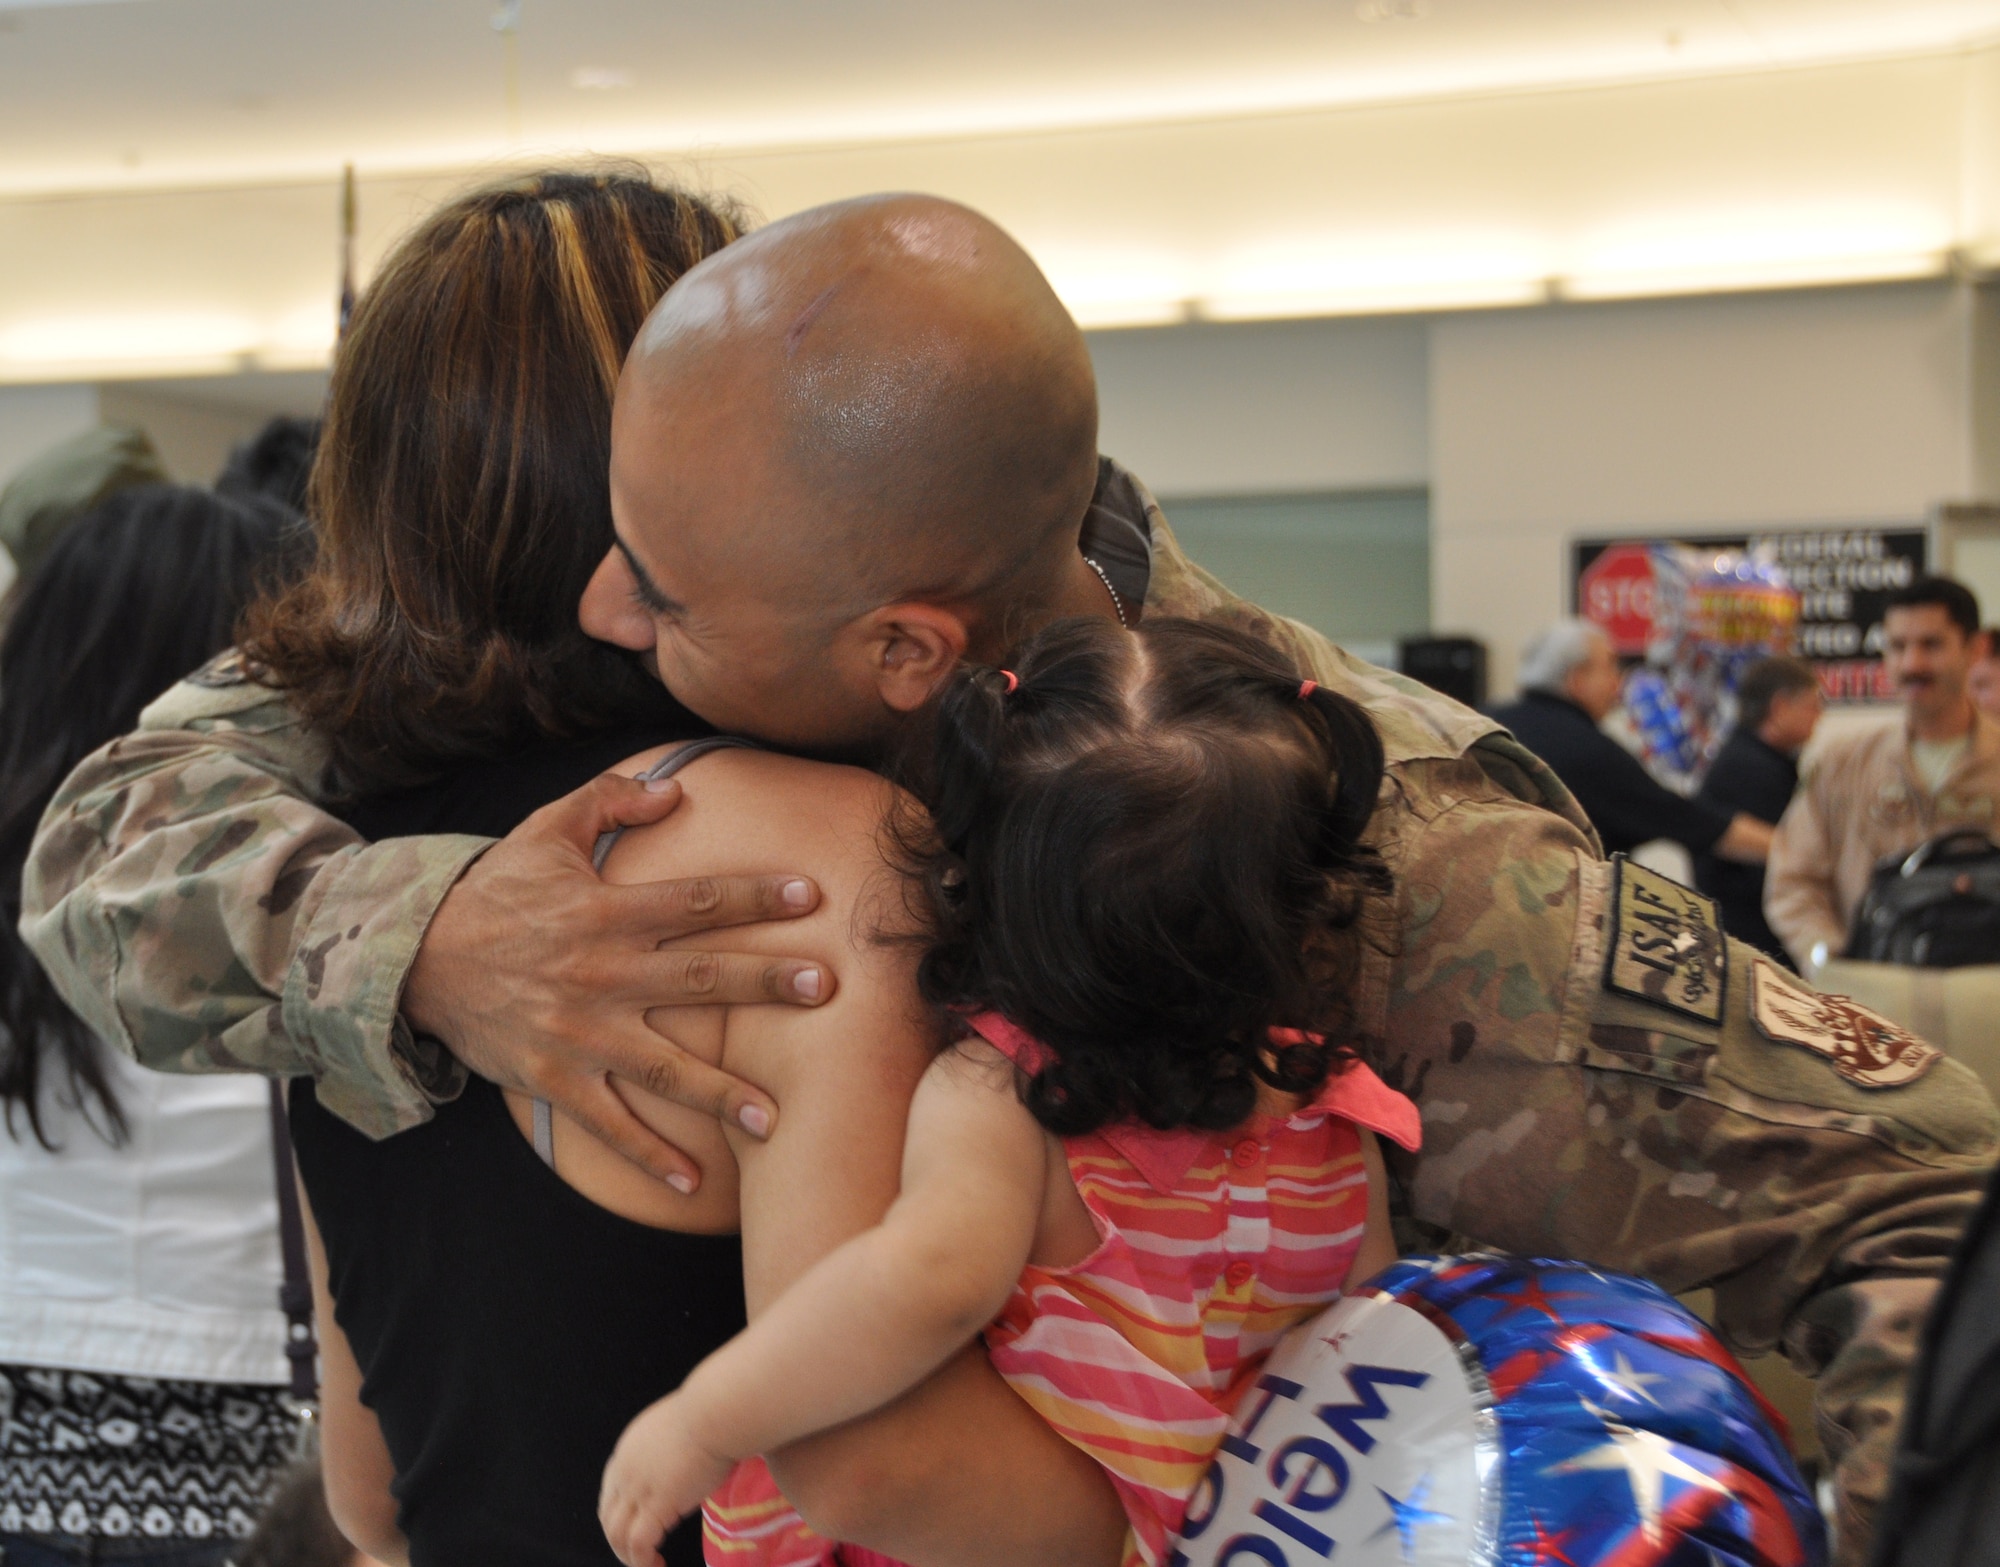 U.S. Air Force Master Sgt. Max Andrade, 69th Aerial Port Squadron, hugs his wife, Ana Andrade and daughter, Genesis, as he exits the terminal at Baltimore-Washington International Thurgood Marshall Airport, Md., Aug. 24, 2012. The 69 APS welcomed home 15 troops who were returning from a six-month deployment to Afghanistan. (U.S. Air Force photo/ Senior Airman Katie Spencer) 